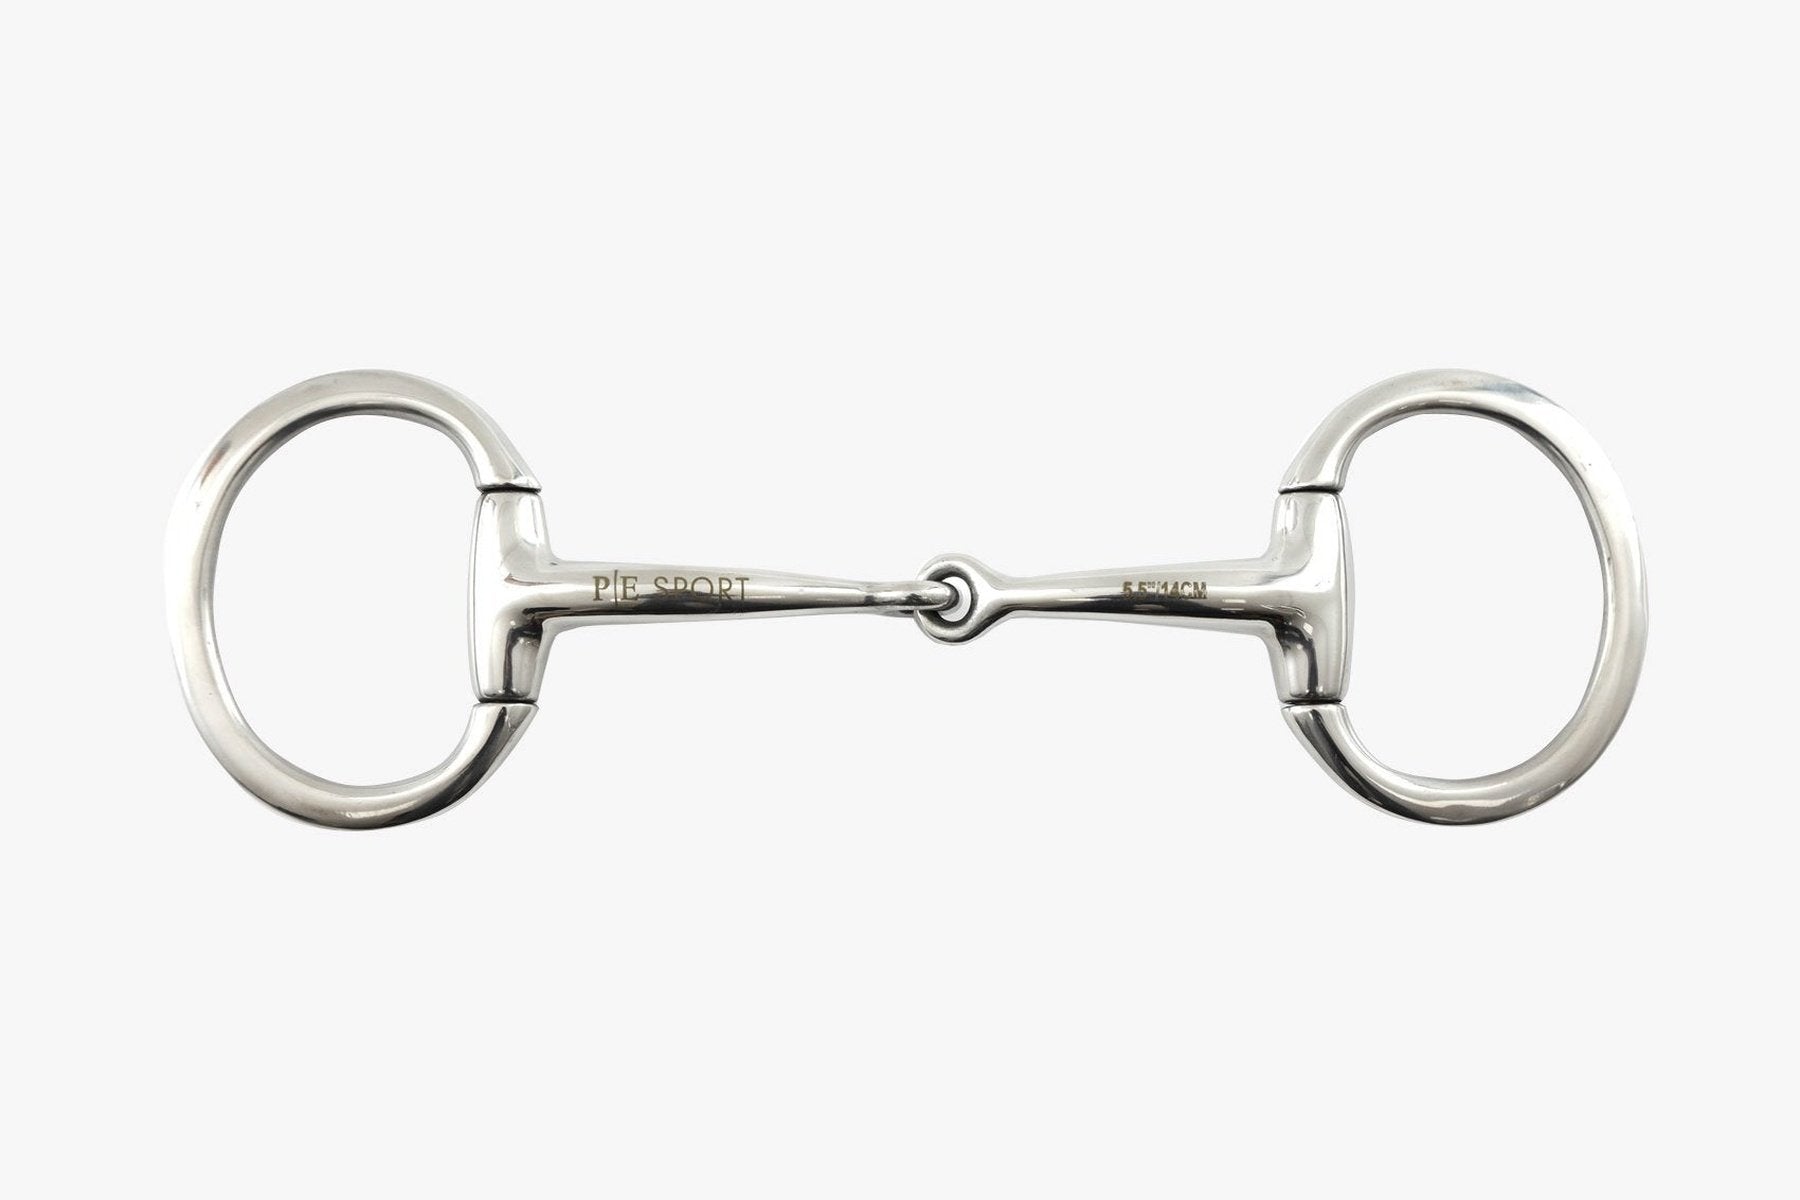 Description:Jointed Flat Ring Eggbutt Snaffle_Colour:Metal_Position:1